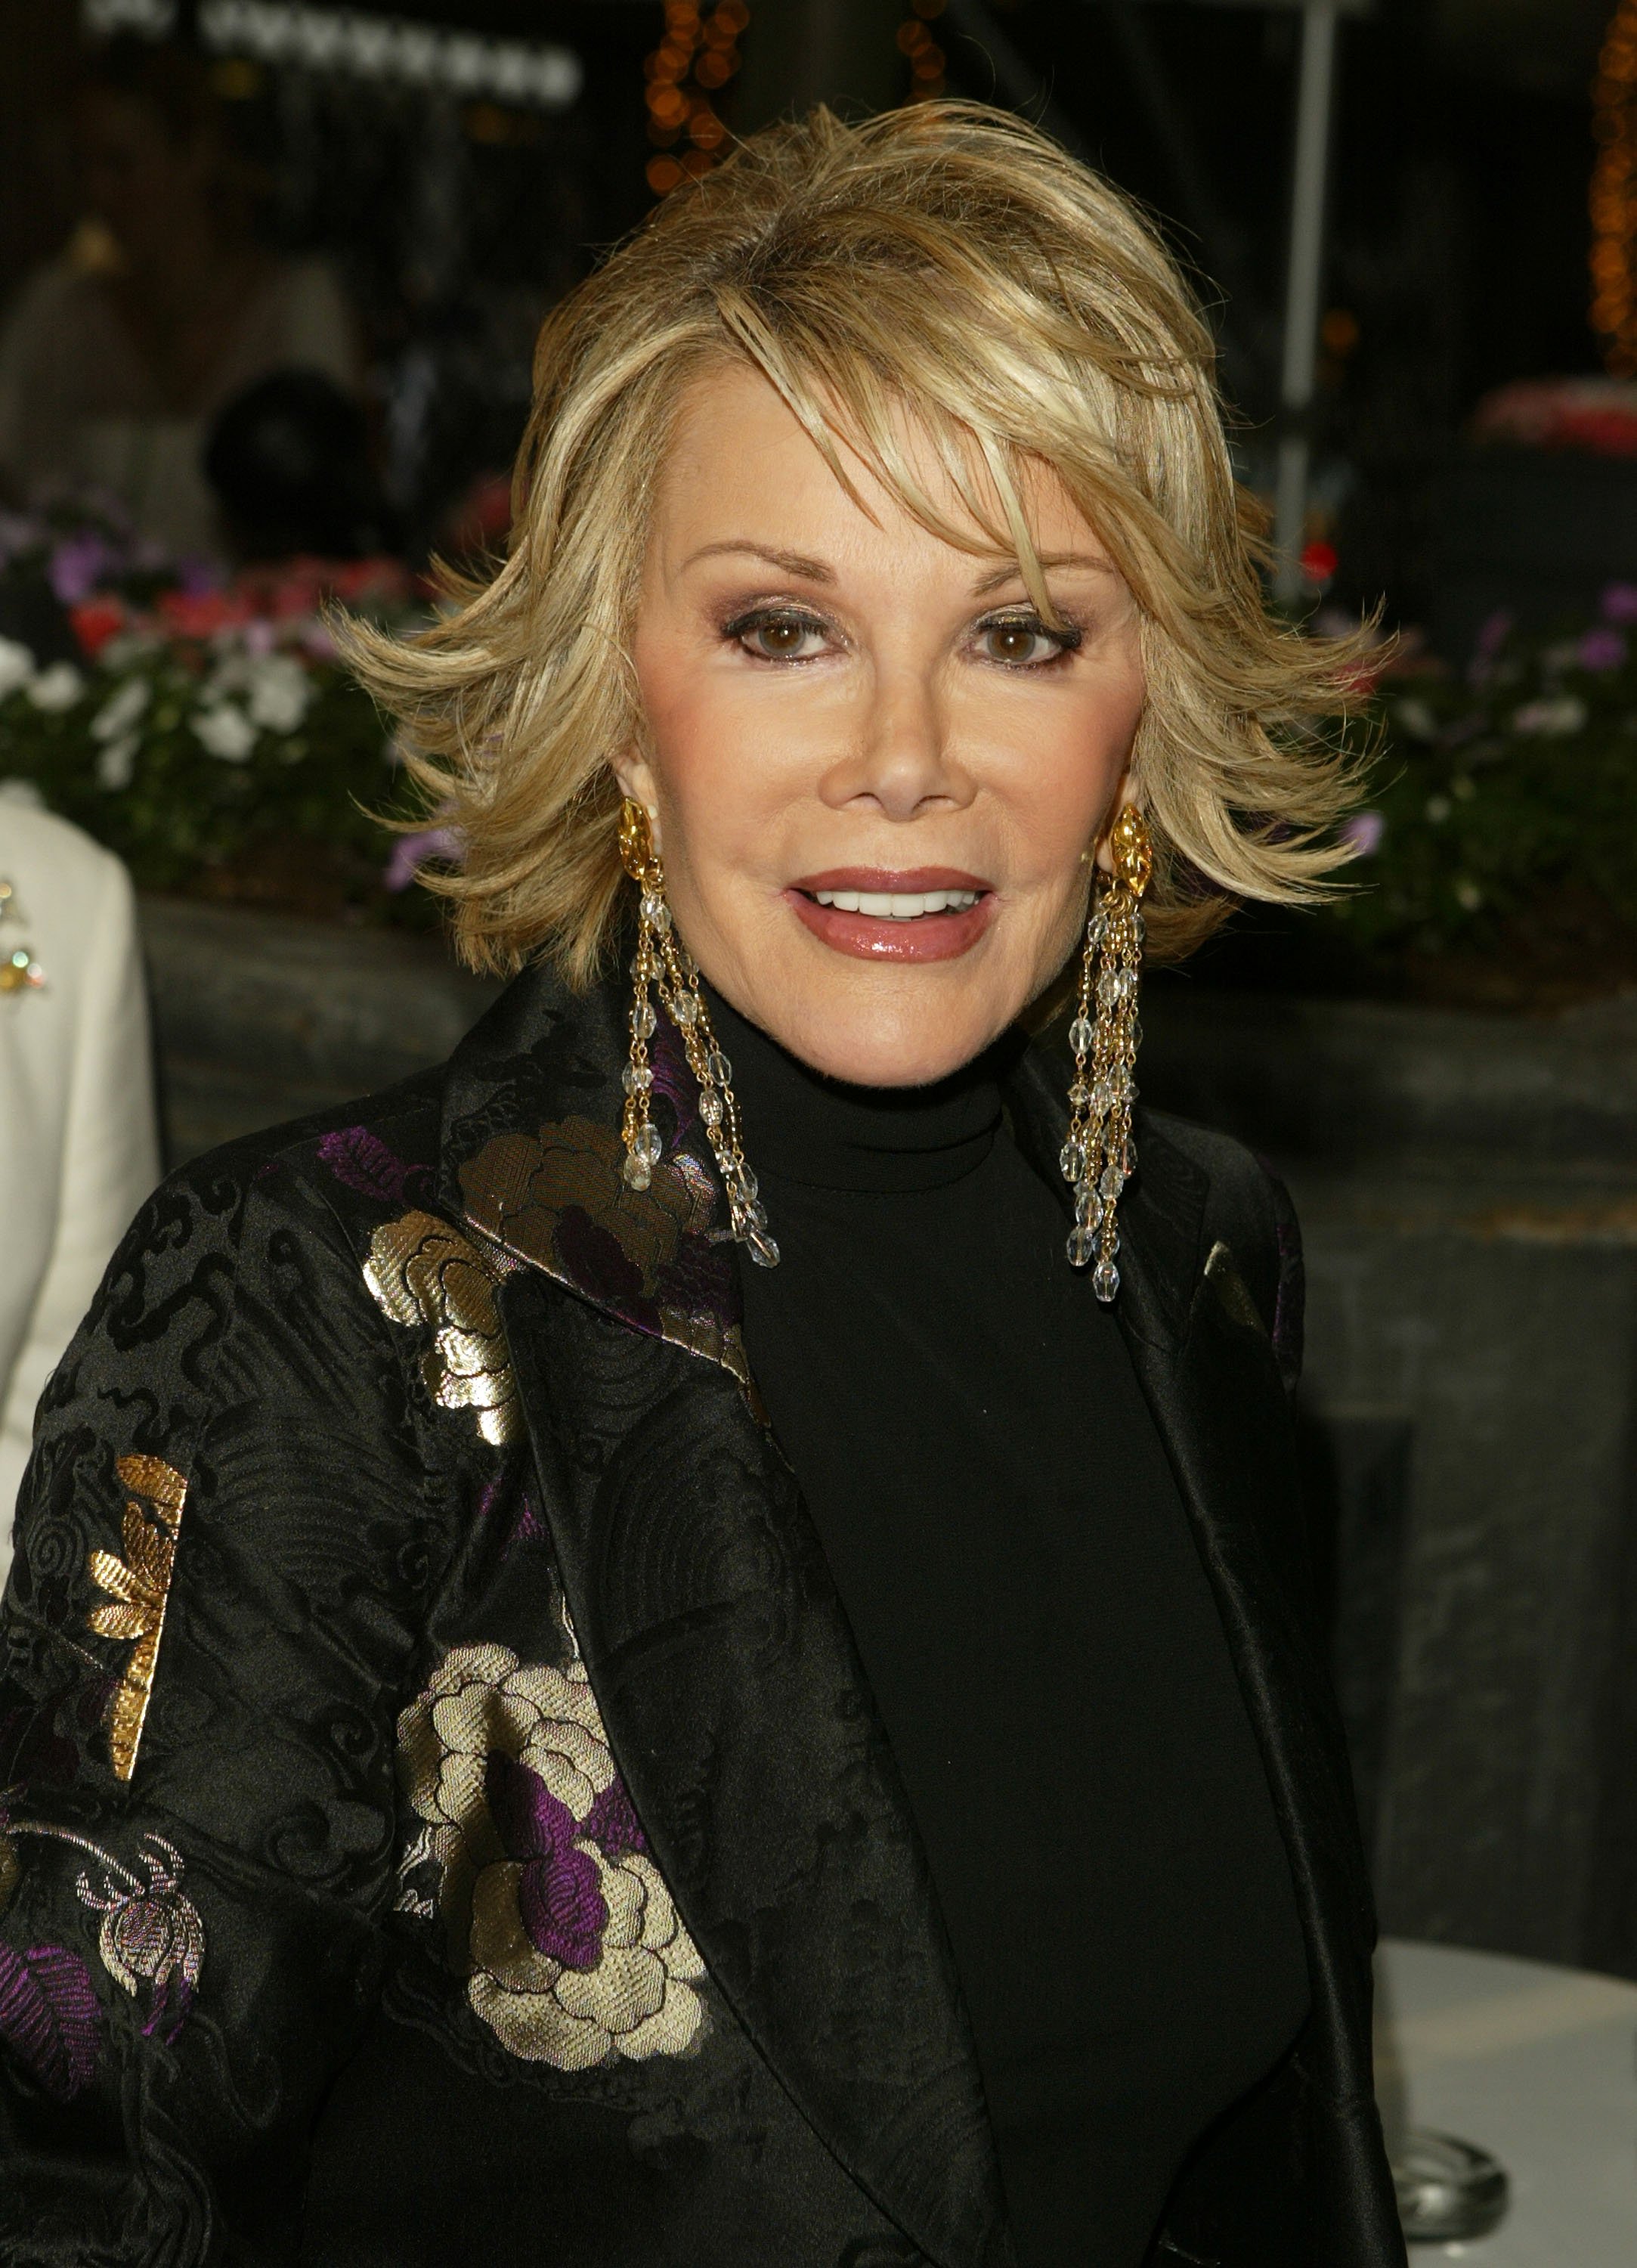 Joan Rivers in New York in 2004. | Source: Getty Images